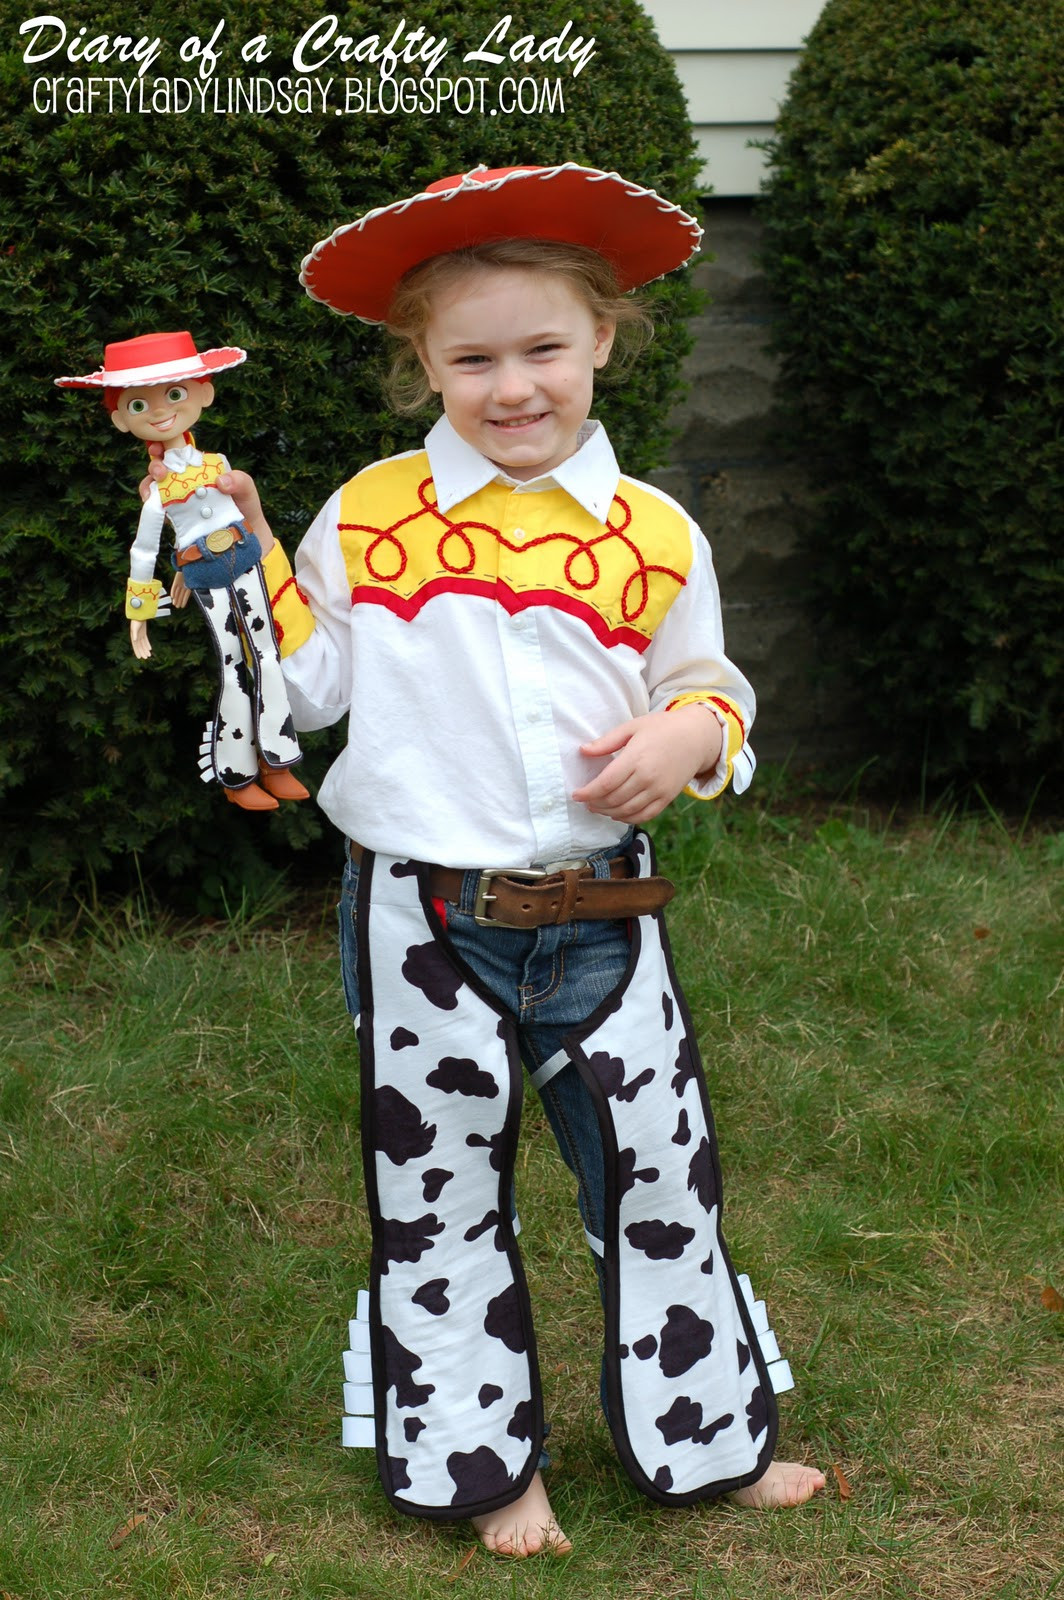 Best ideas about DIY Jessie Costume
. Save or Pin Diary of a Crafty Lady Cowgirl Jessie Halloween Costume Now.